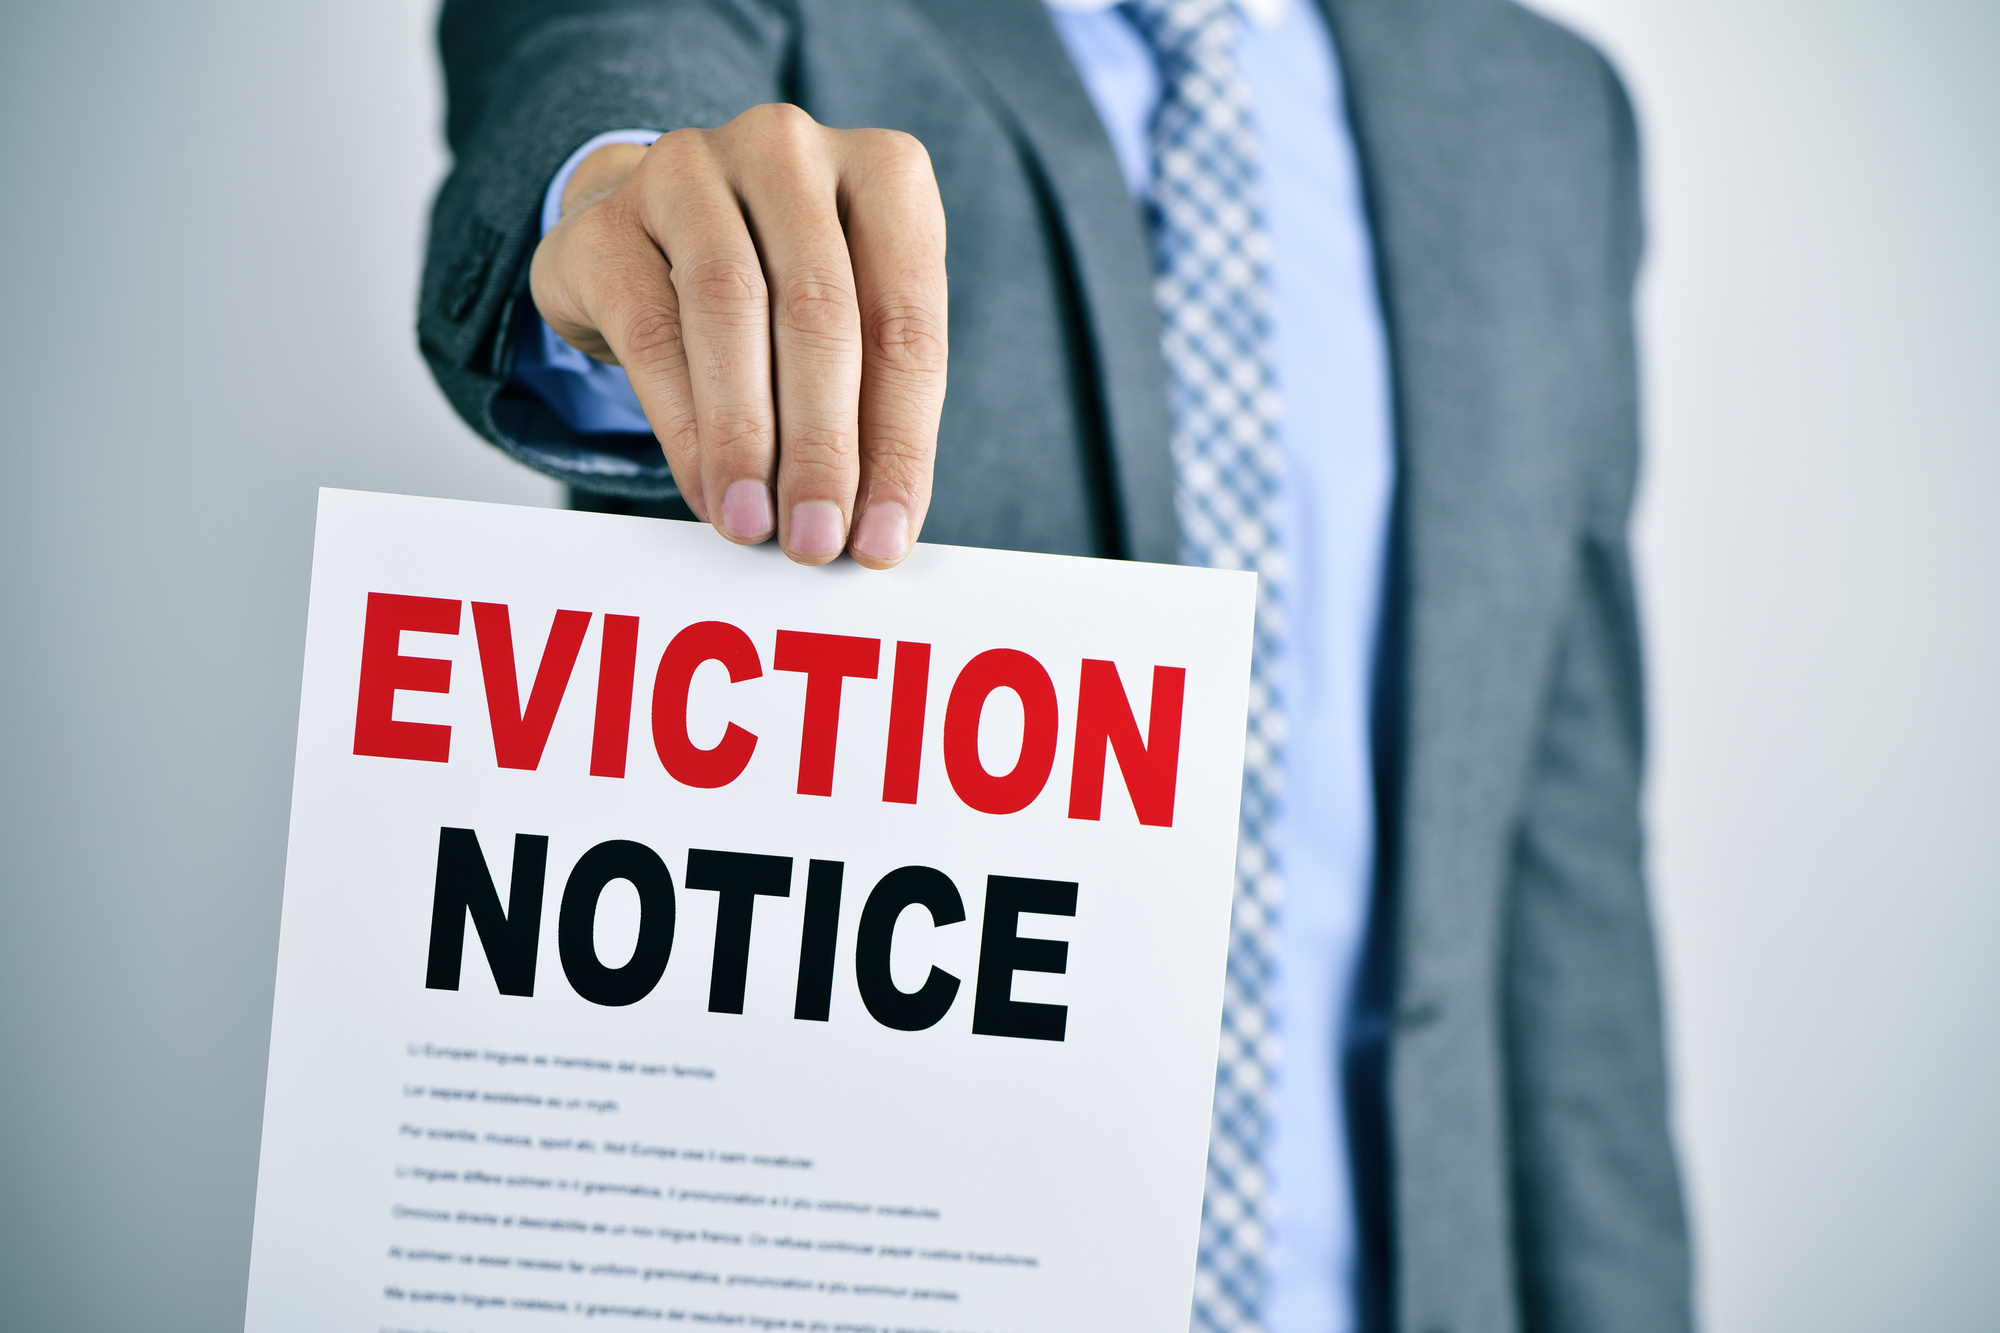 How to Evict a Tenant: A Quick Guide